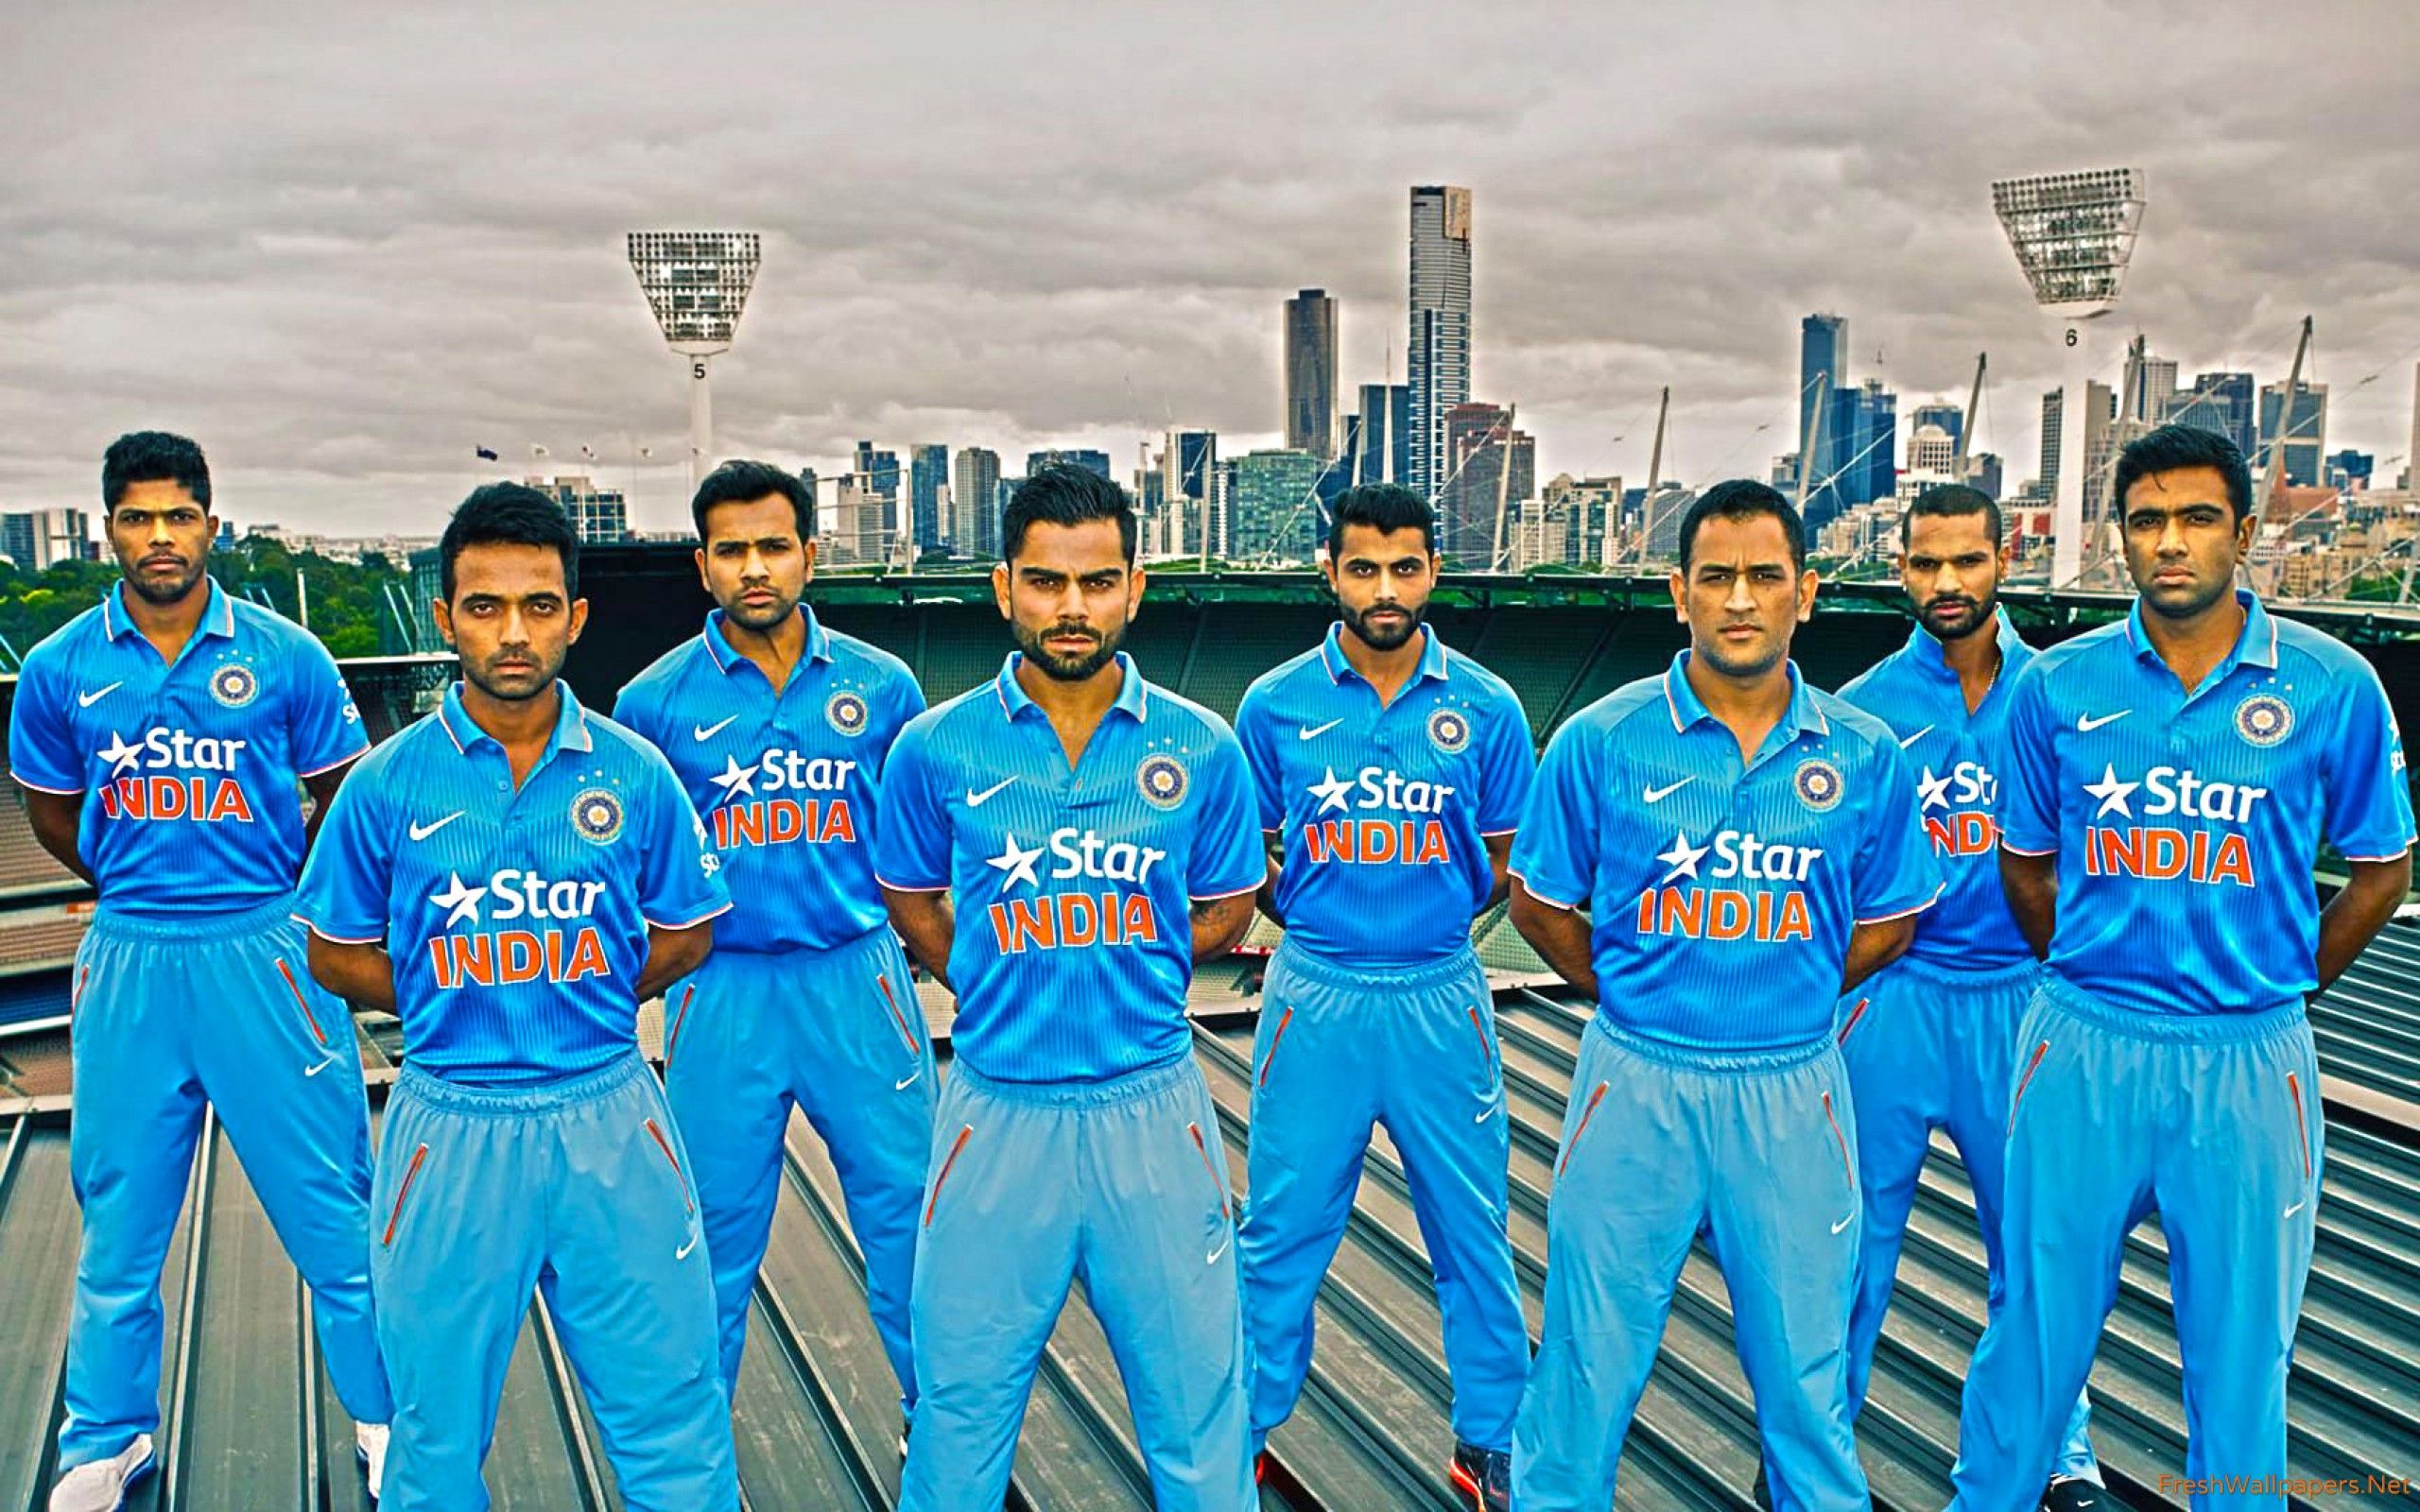 Indian Cricket Team Full Hd Quality Images, Indian - 2017 World Cup Indian Team - HD Wallpaper 